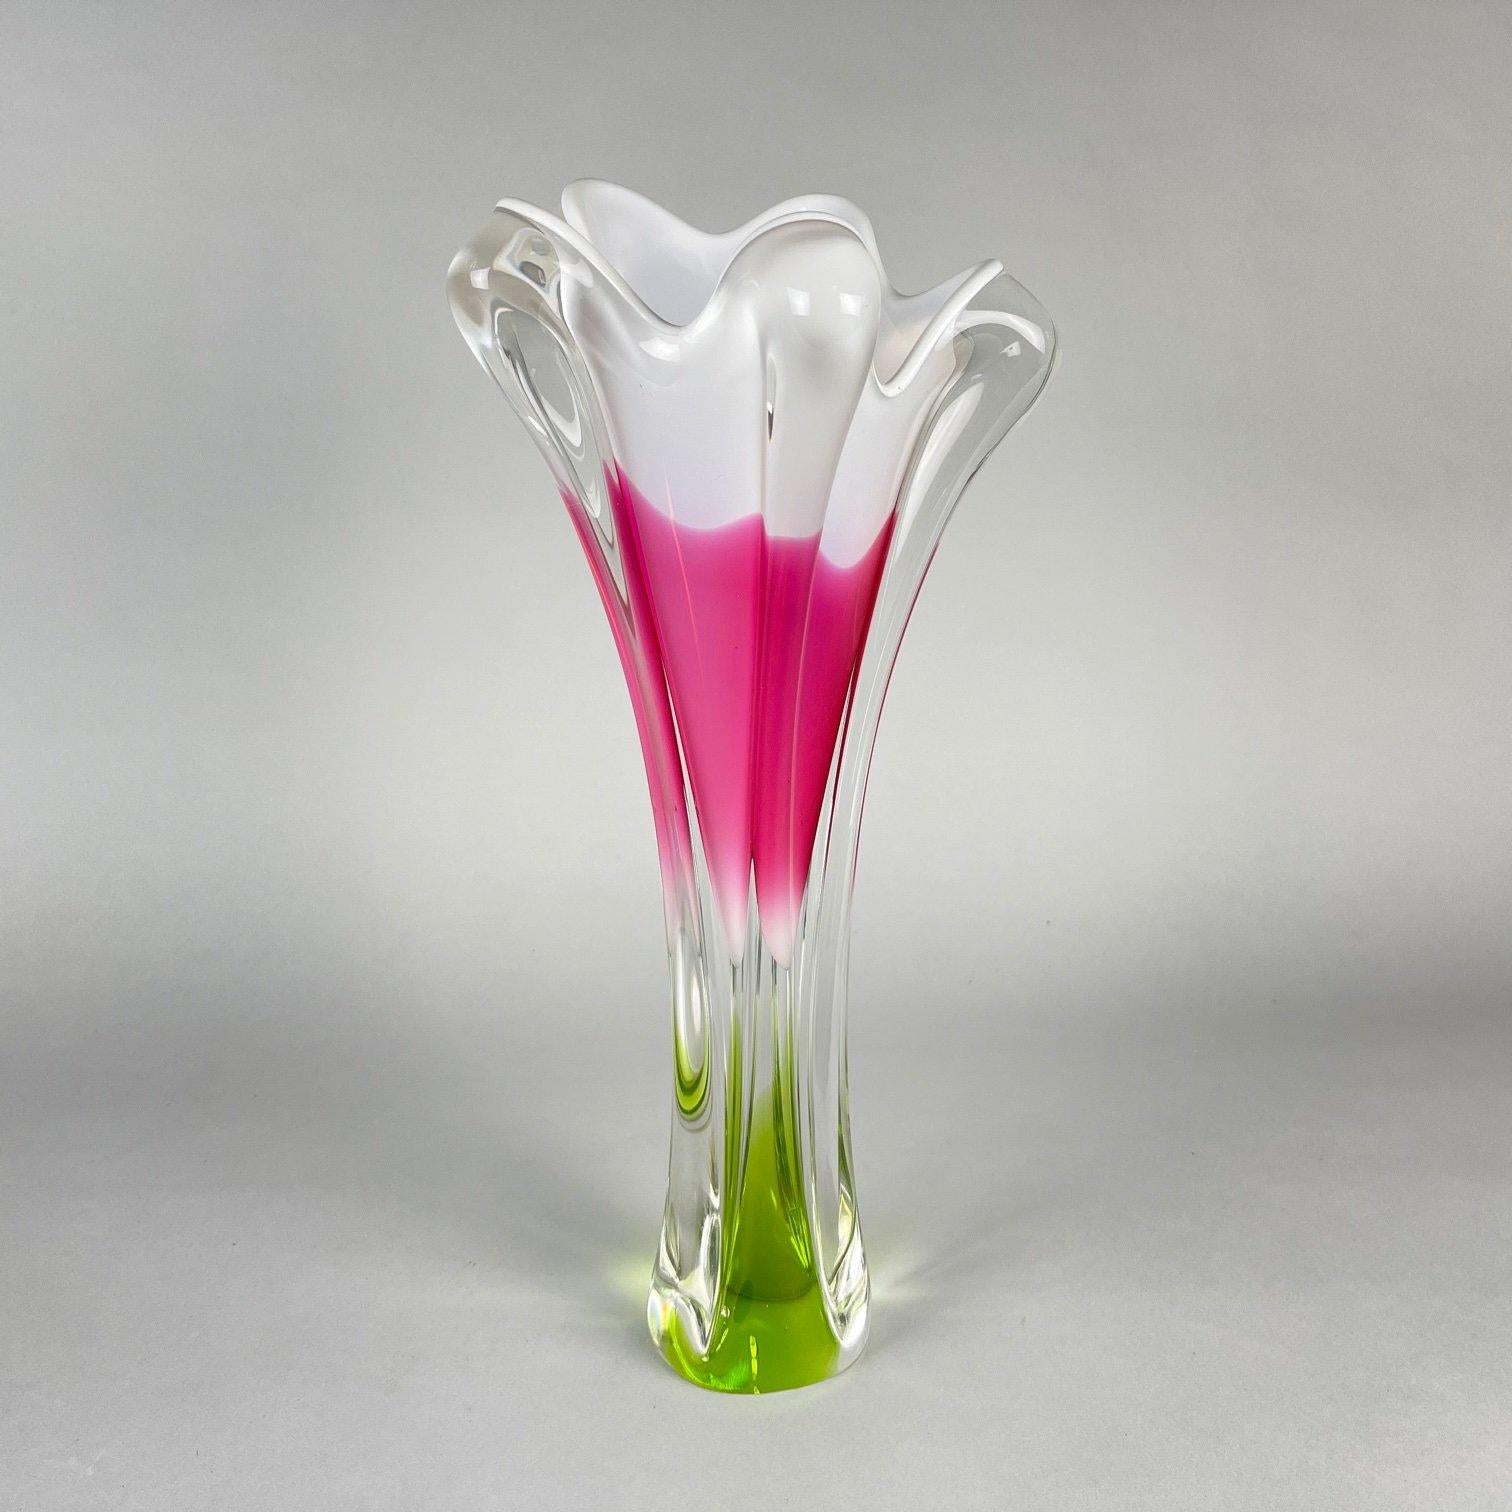 Tall sculptural Czech art glass vase, designed by Josef Hospodka in the 1960's and made by the Chribská Glassworks. Combination of pink, green and clear glass with a lovely opaque white rim.
Very good vintage condition with some signs of use (see